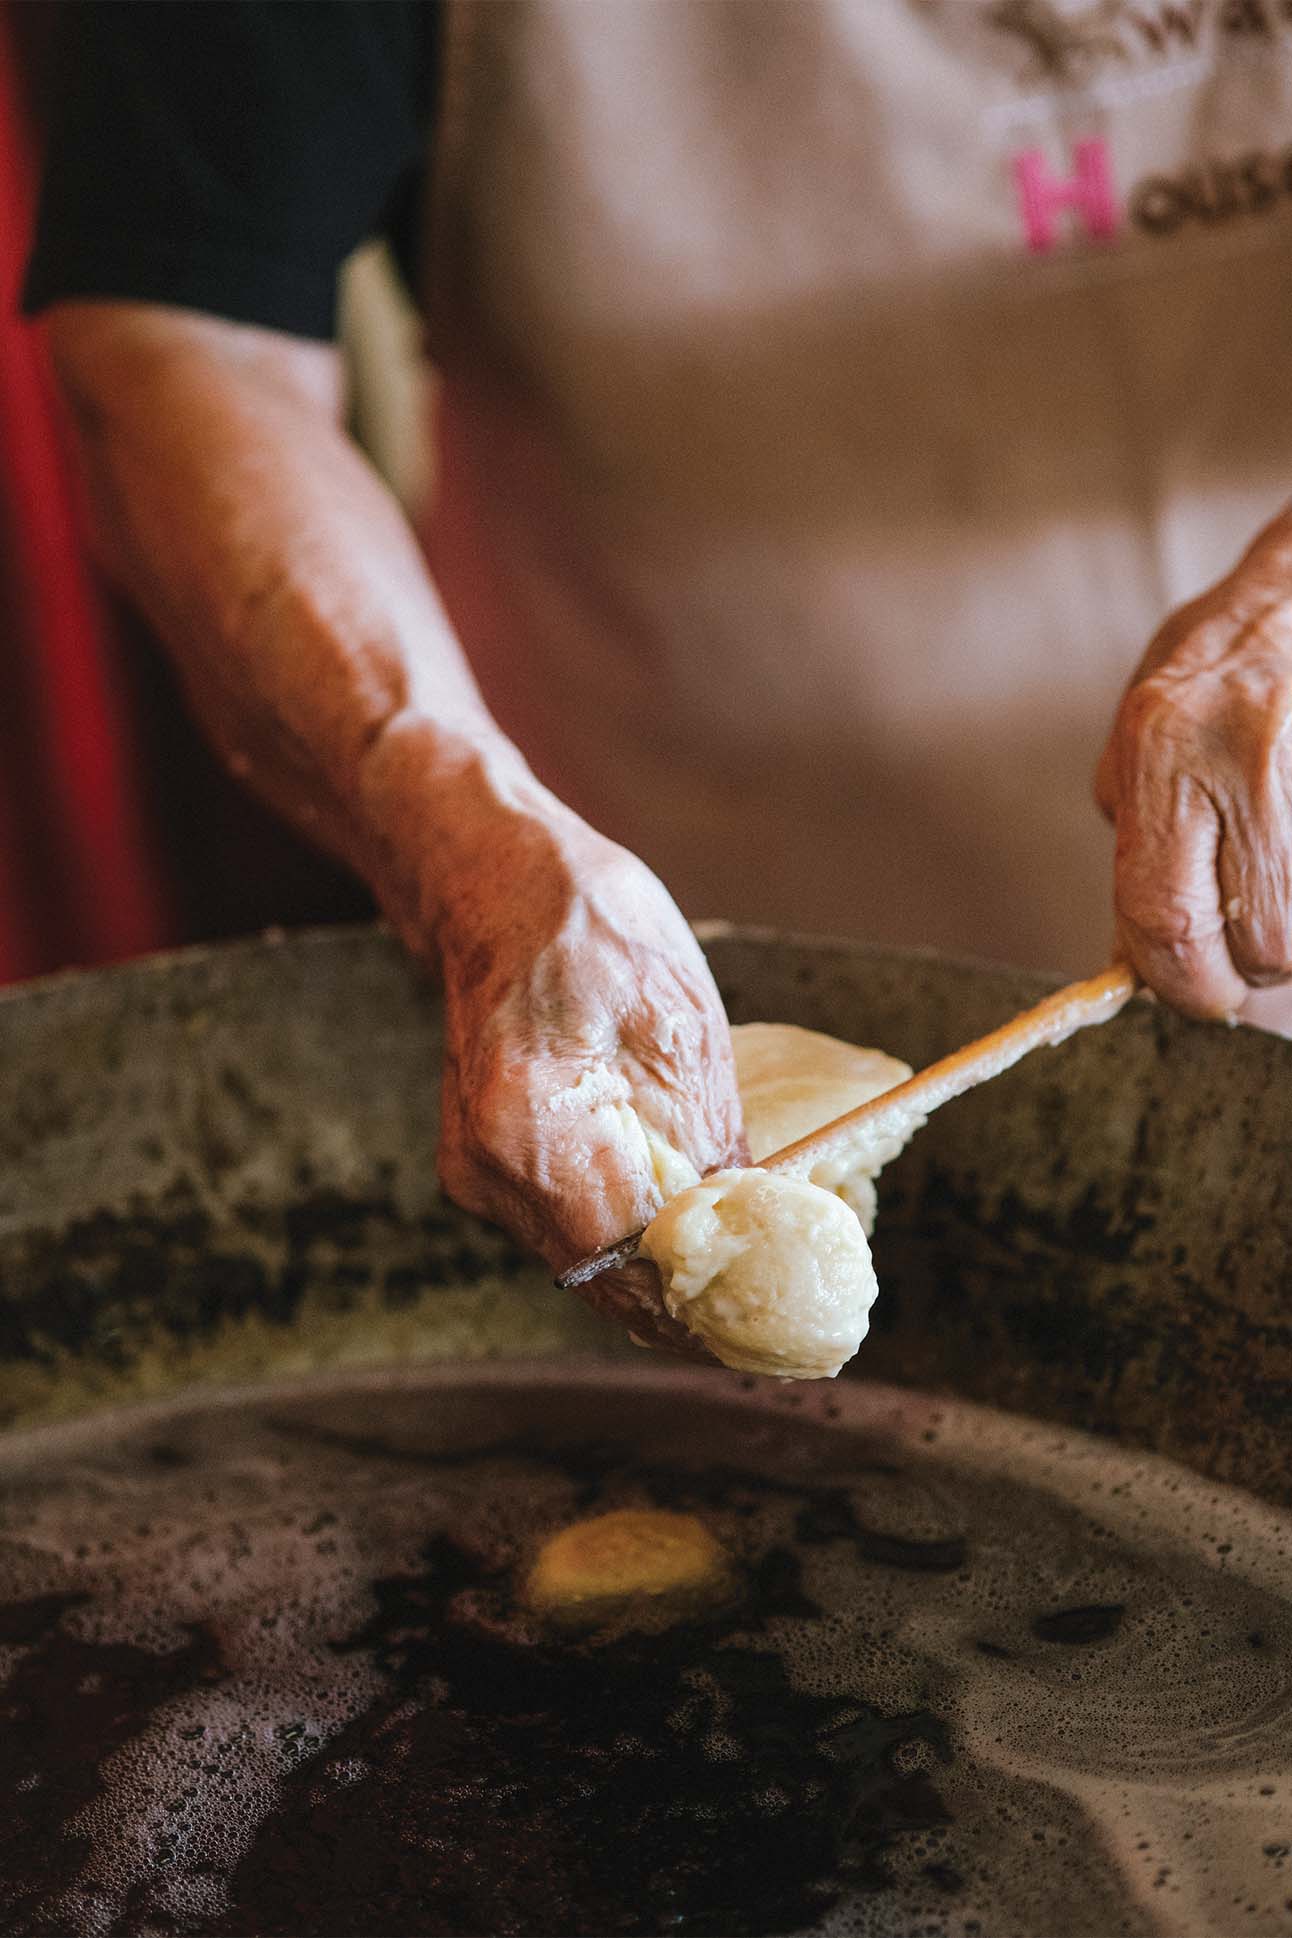 An elderly person's hands, wearing an apron, scooping homemade butter from a large wooden bowl with a flat utensil.